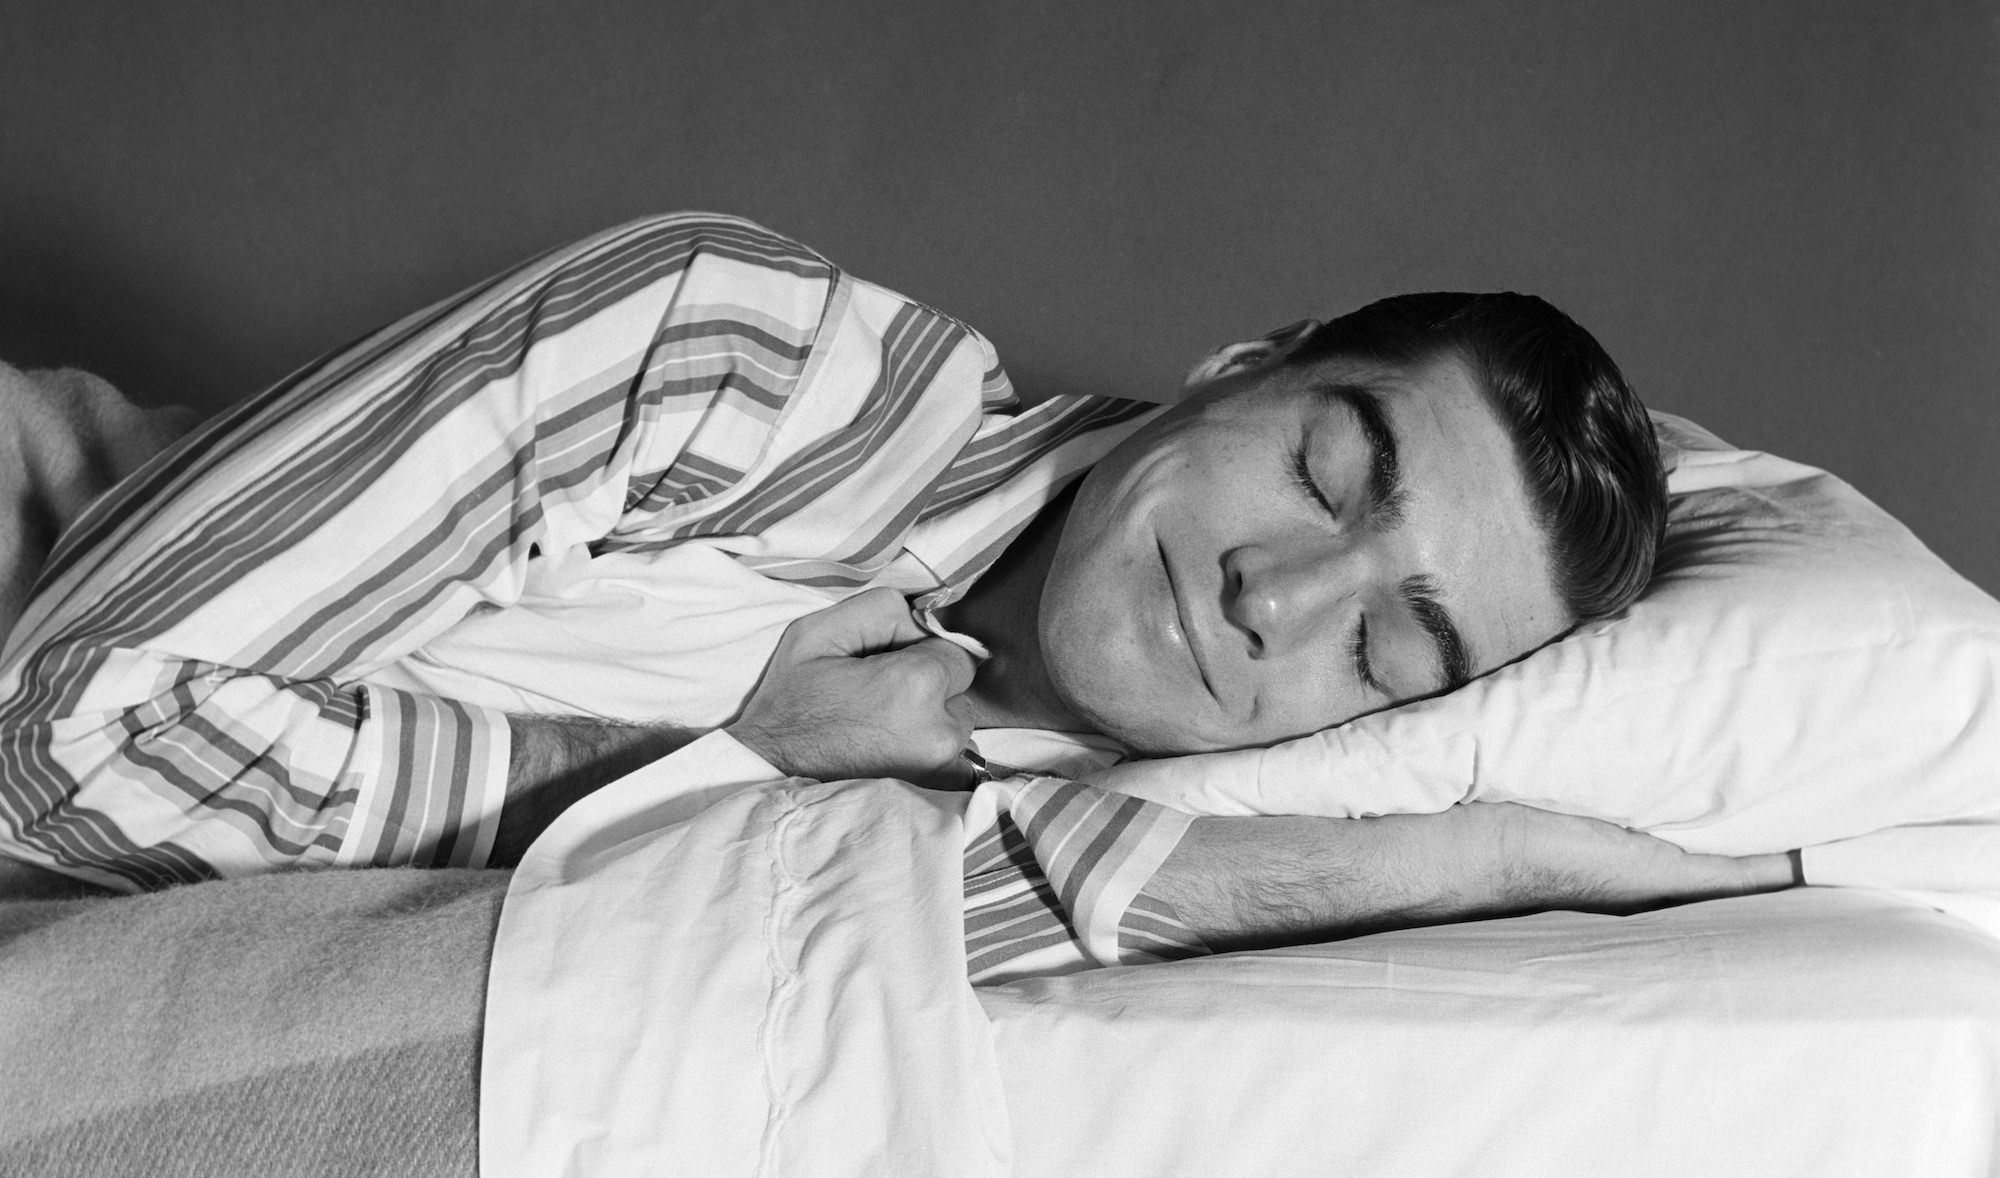 1950s 1960s MAN IN STRIPED PAJAMAS SMILING ASLEEP IN BED (Photo by ClassicStock/Getty Images)